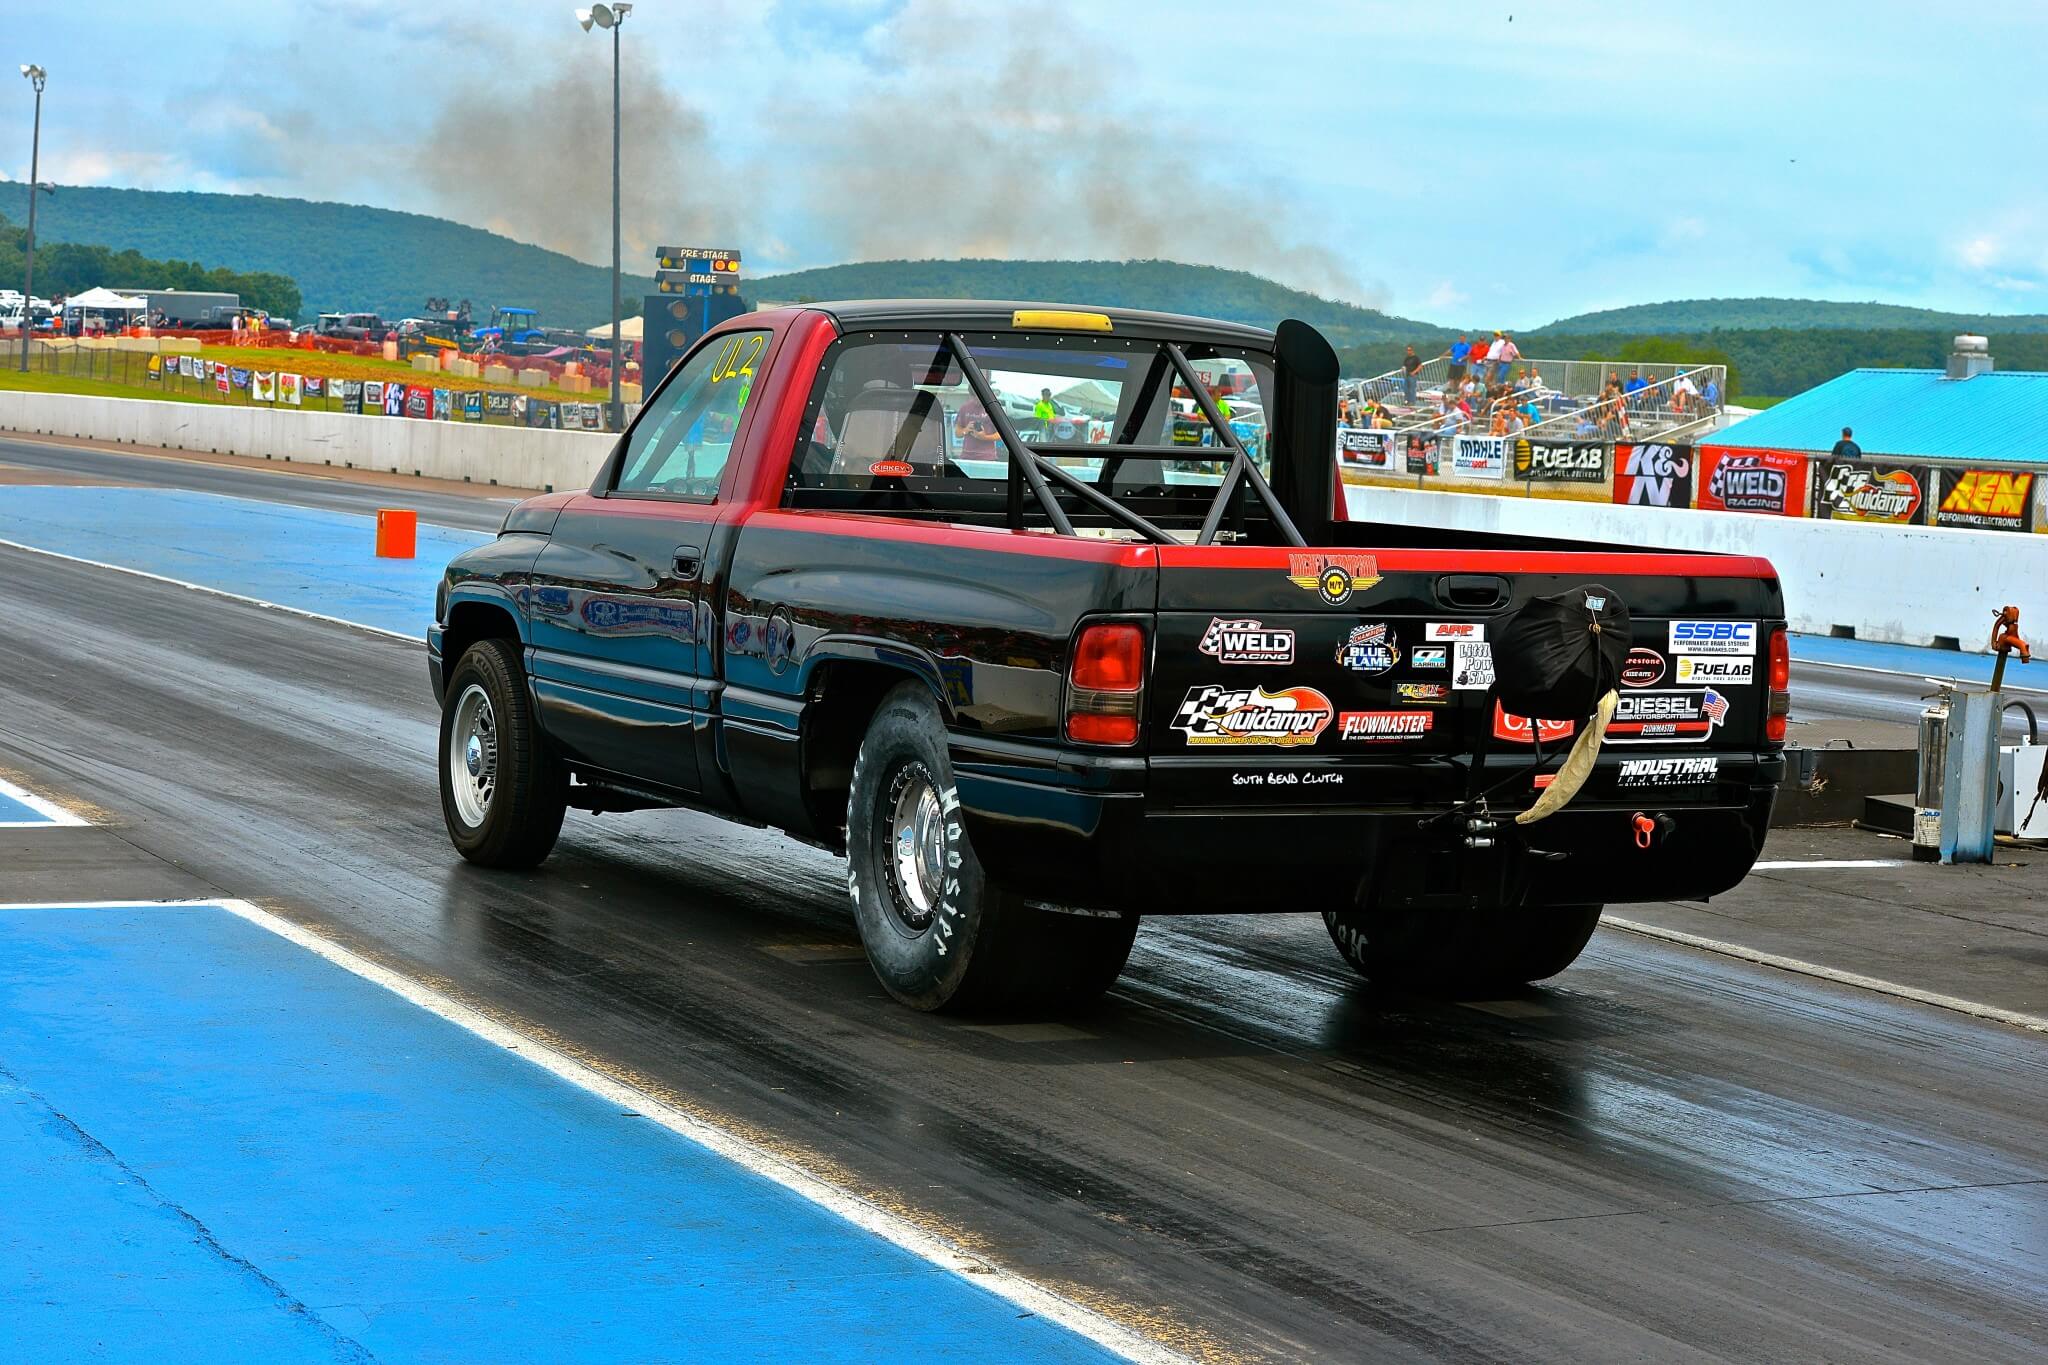 Mark House from Bealeton, Virginia, took second in the Unlimited Heads Up drag race.